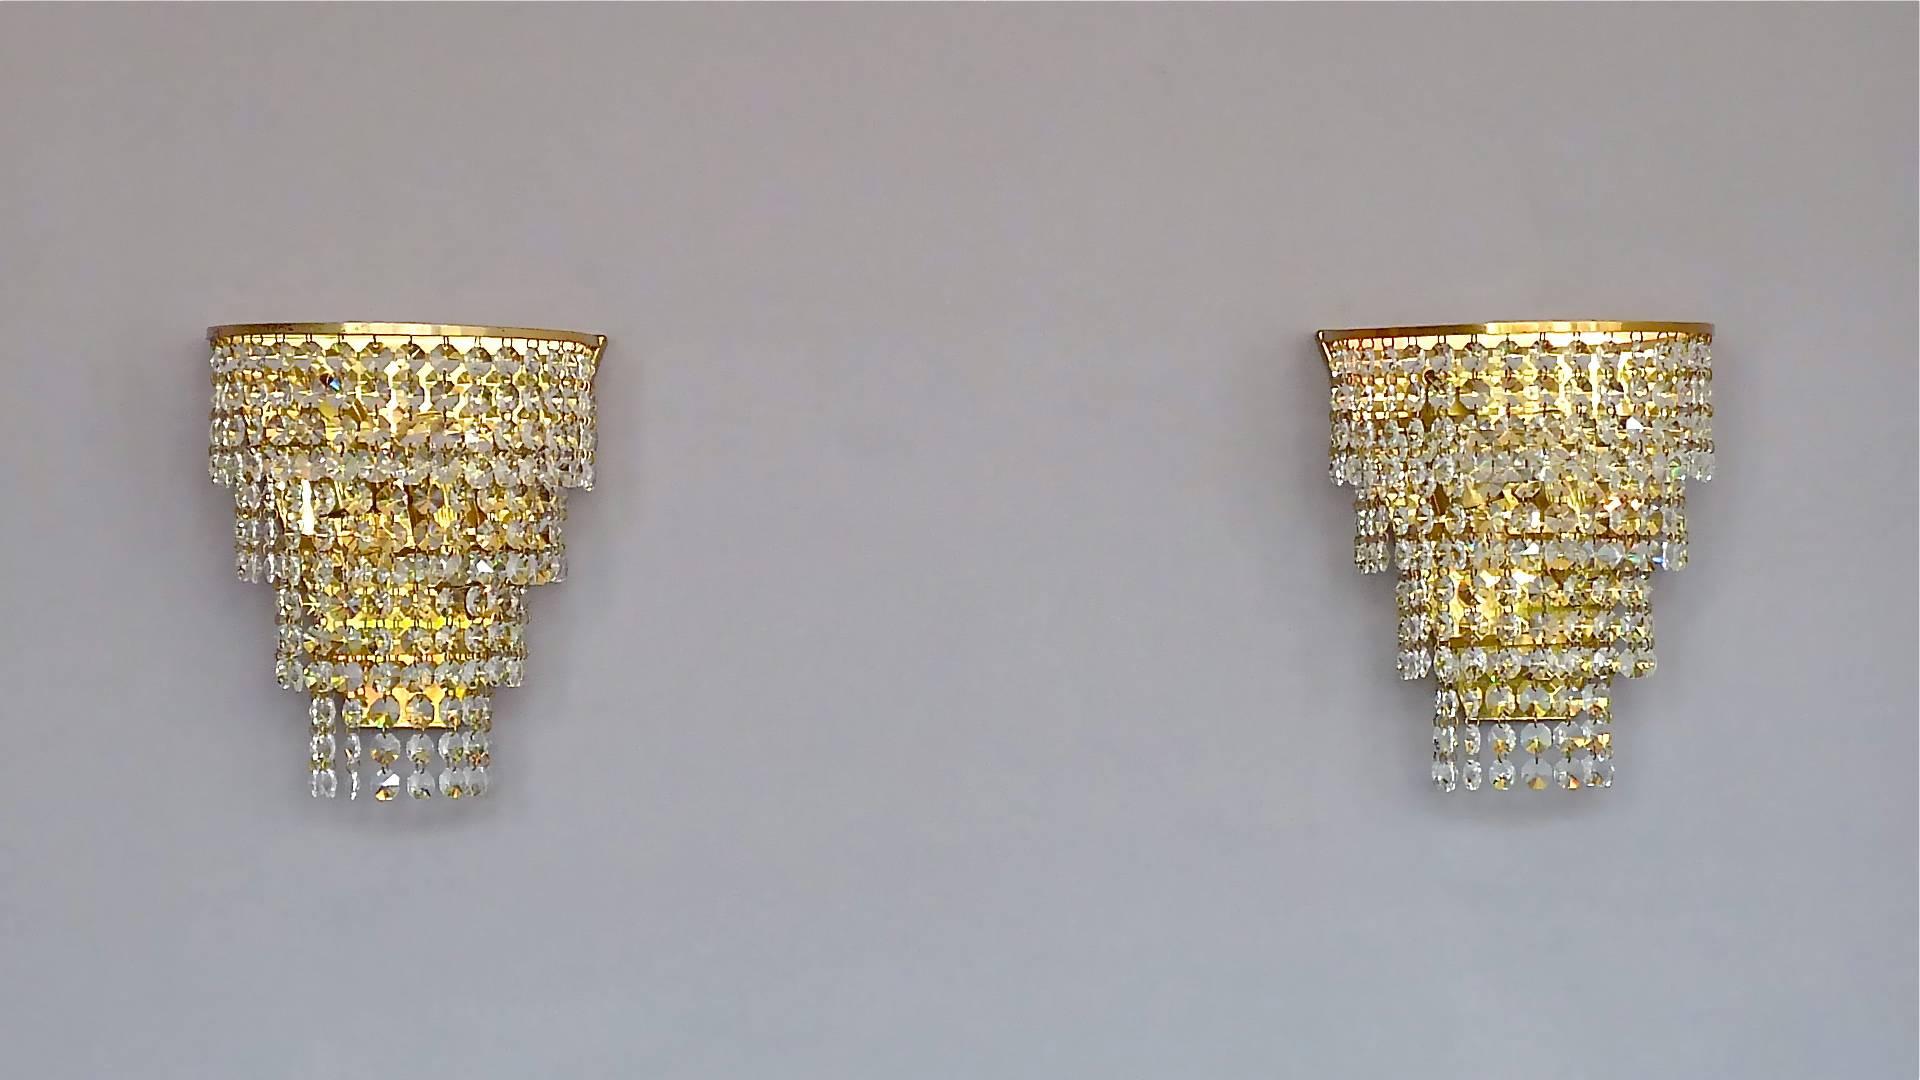 Precious midcentury pair of cascading waterfall crystal glass sconces designed and executed in the 1960s and made by the famous German first class lighting company Palwa. The beautifully handcrafted and manufactured four-tier wall appliques are made